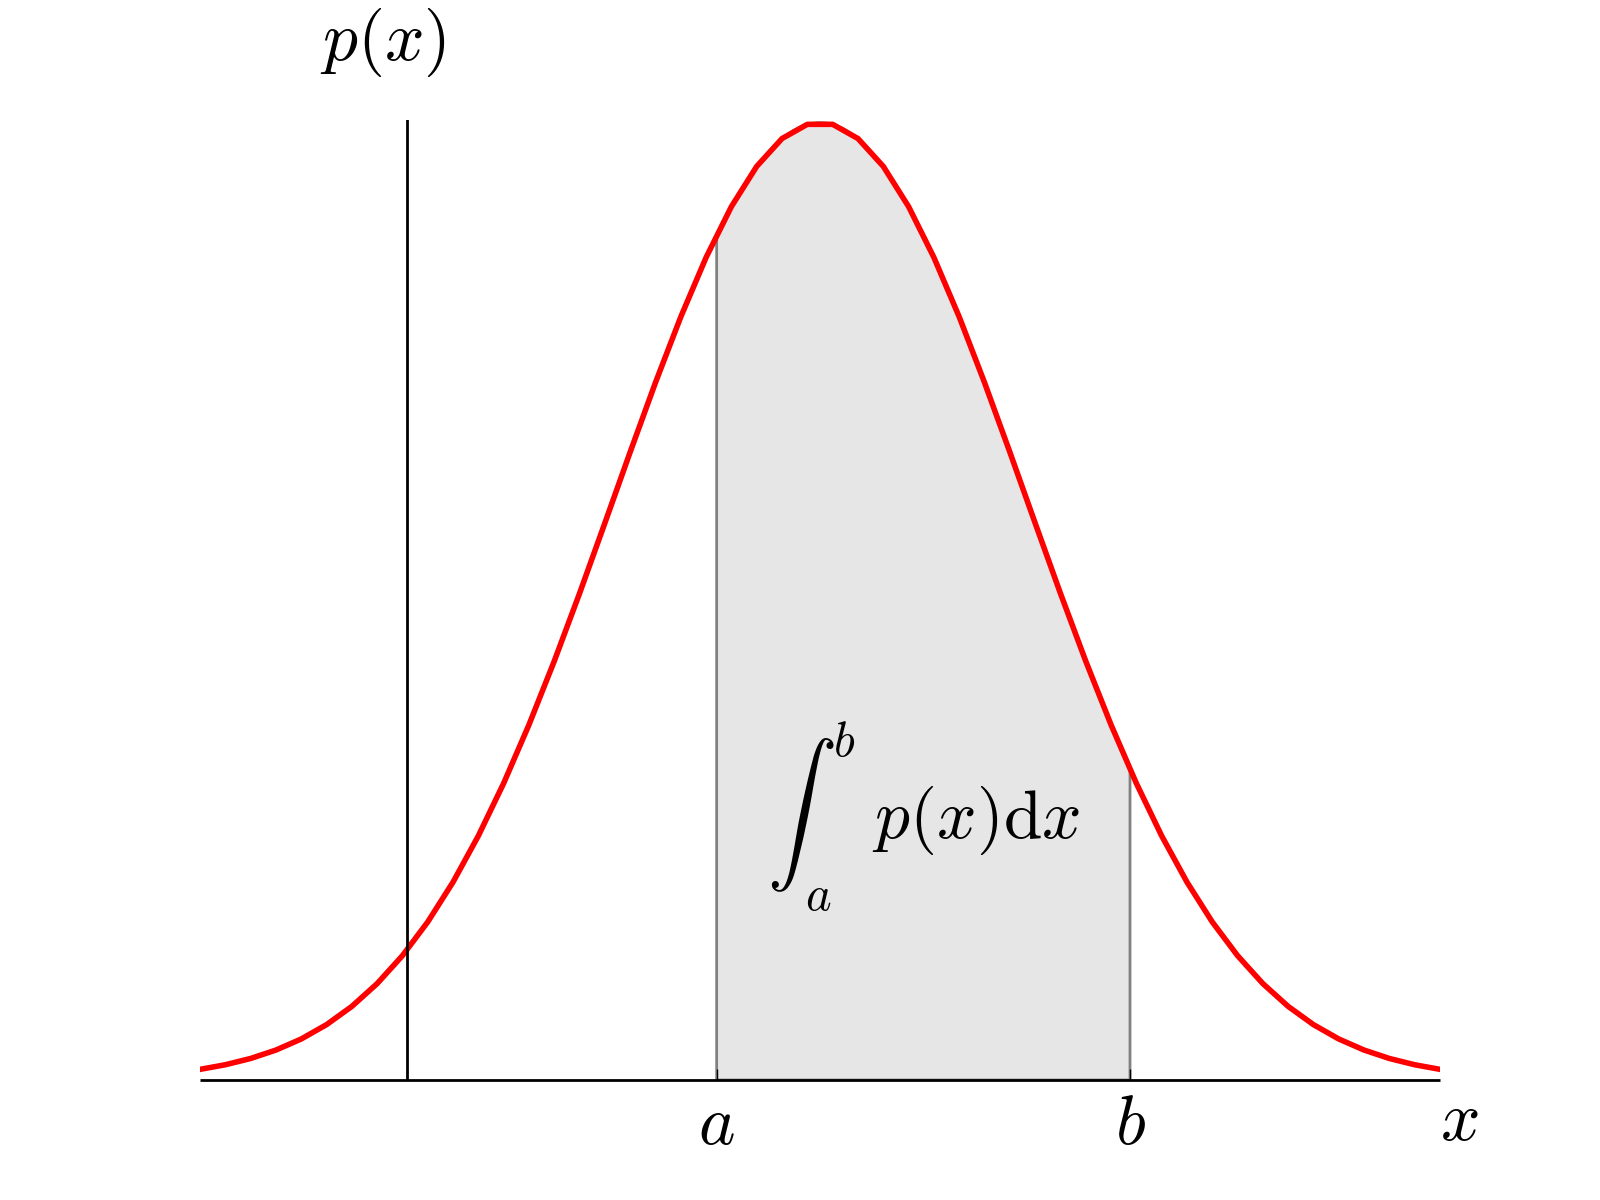 distributions3: Probability Distributions as S3 Objects